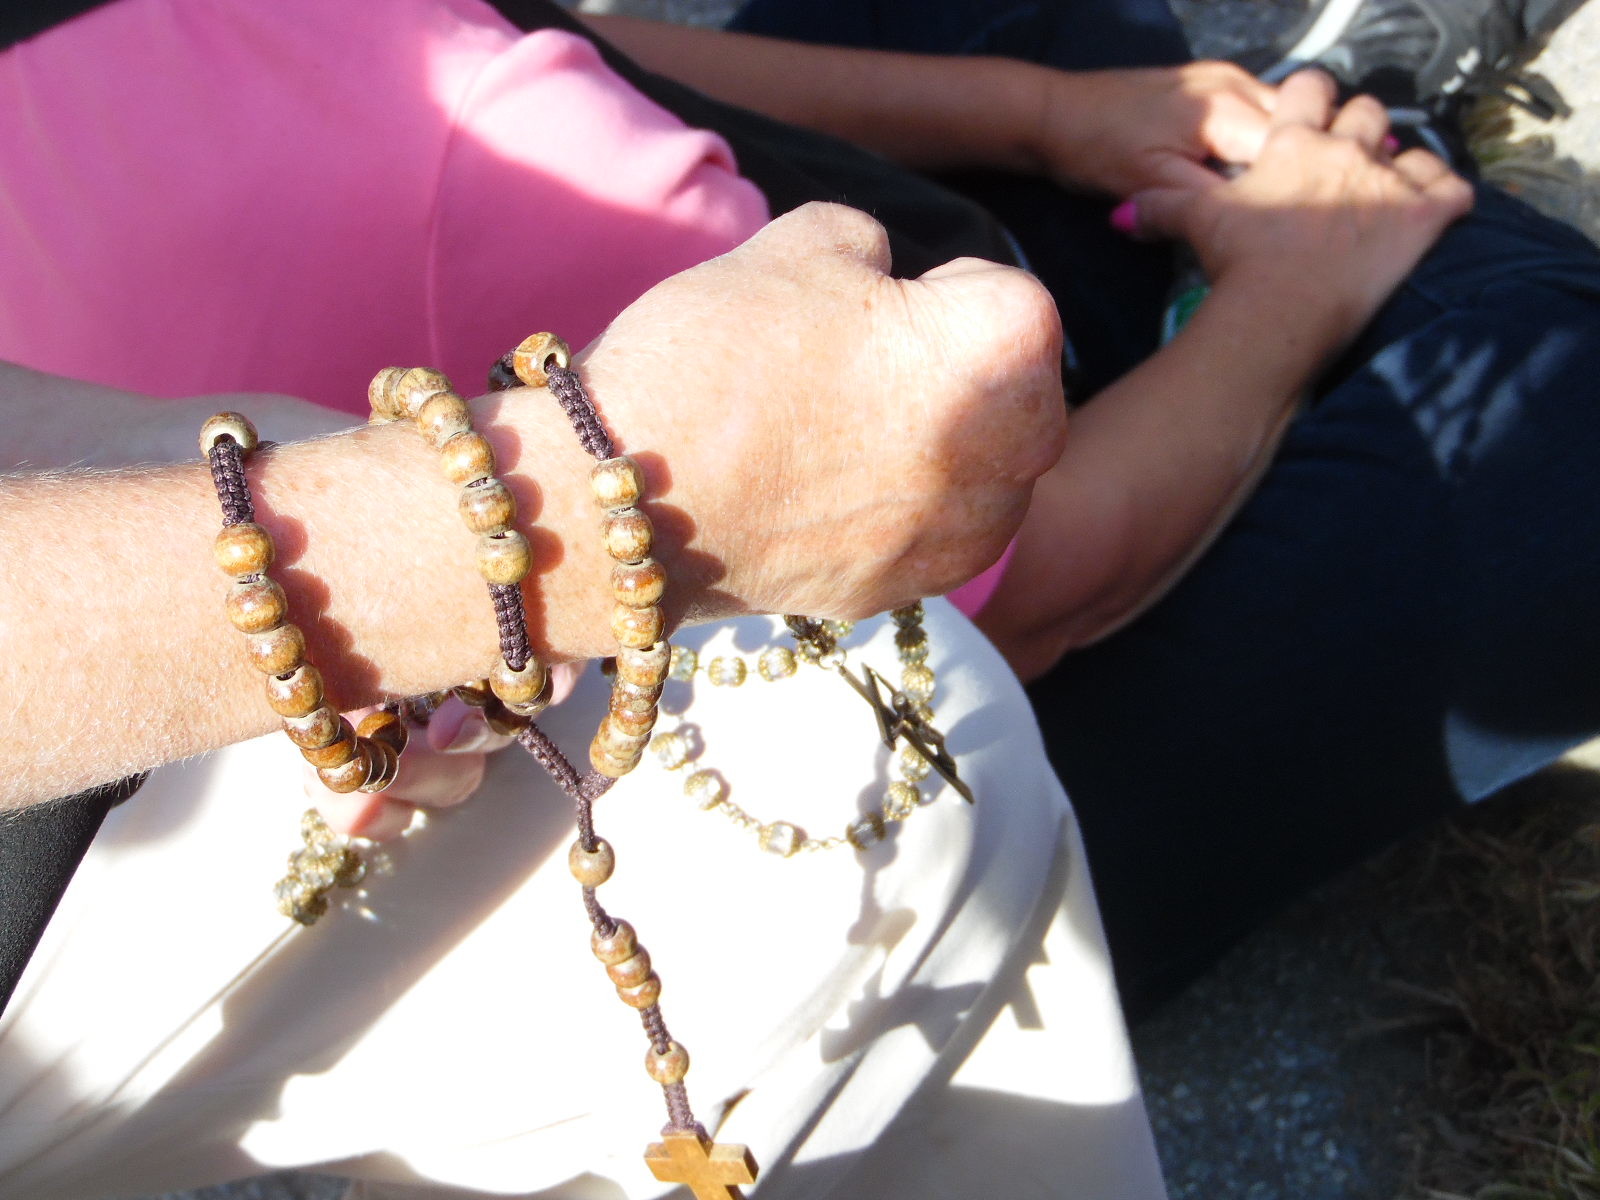 A woman prayed with her rosary beads.